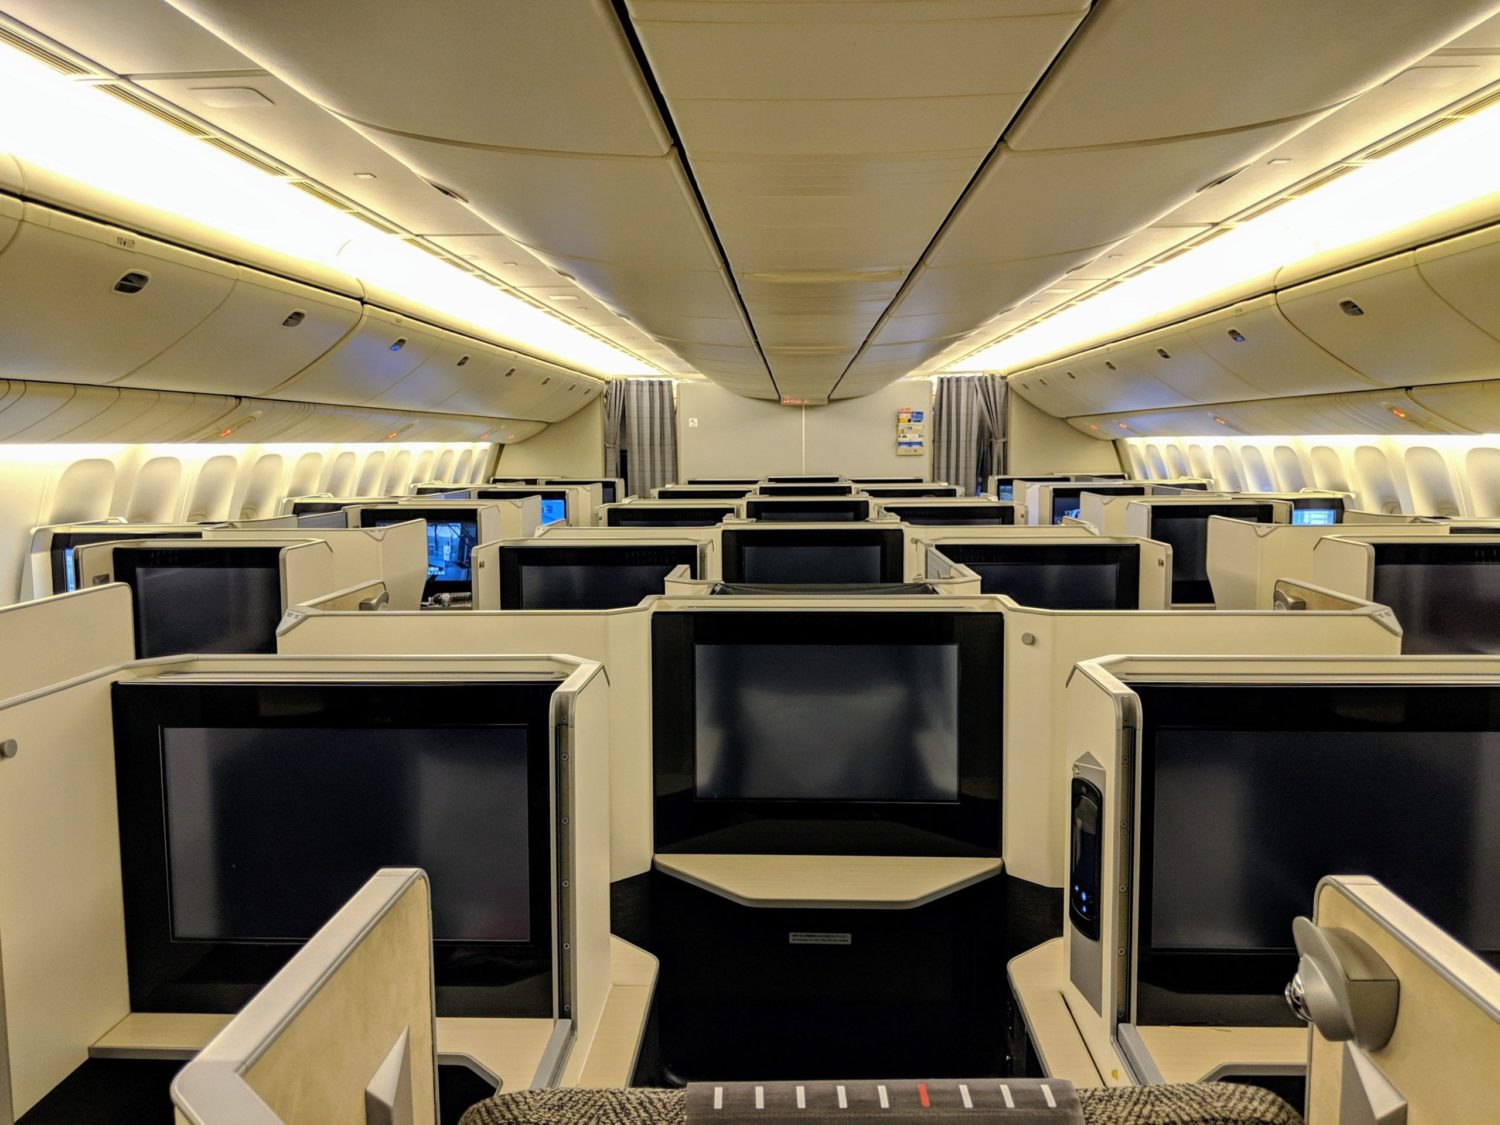 Japan Airlines Business Class seats